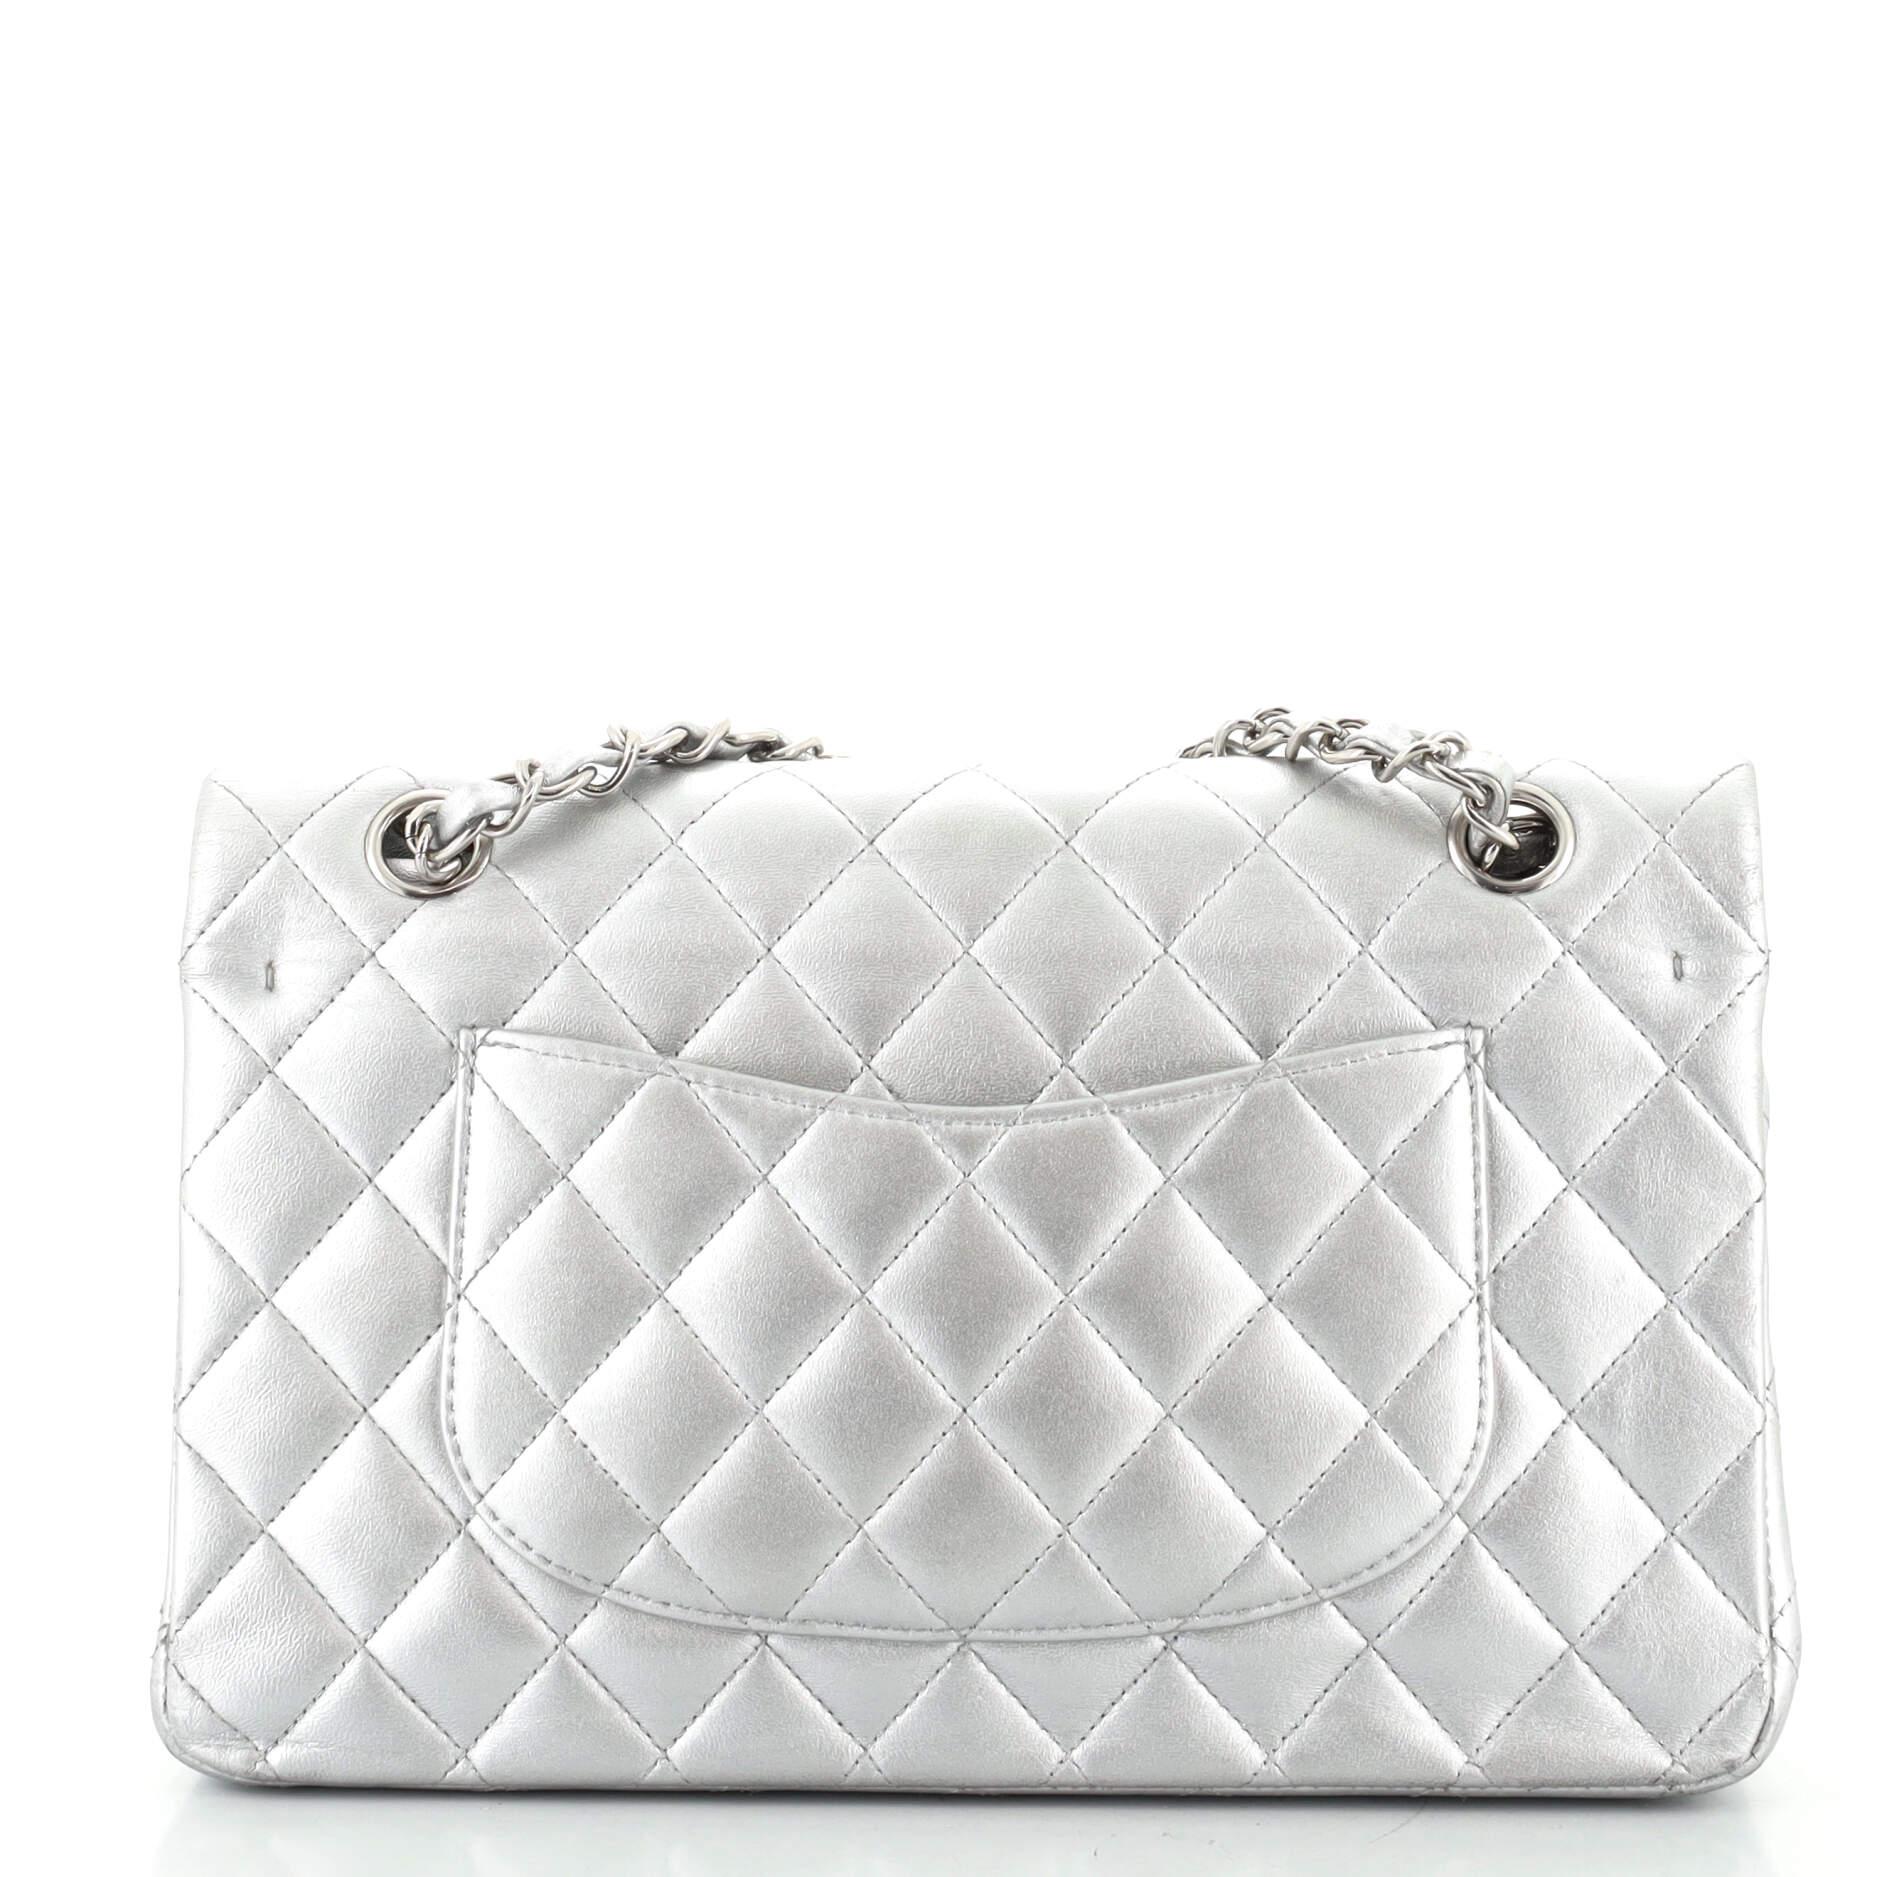 Gray Chanel Classic Double Flap Bag Quilted Metallic Lambskin Medium